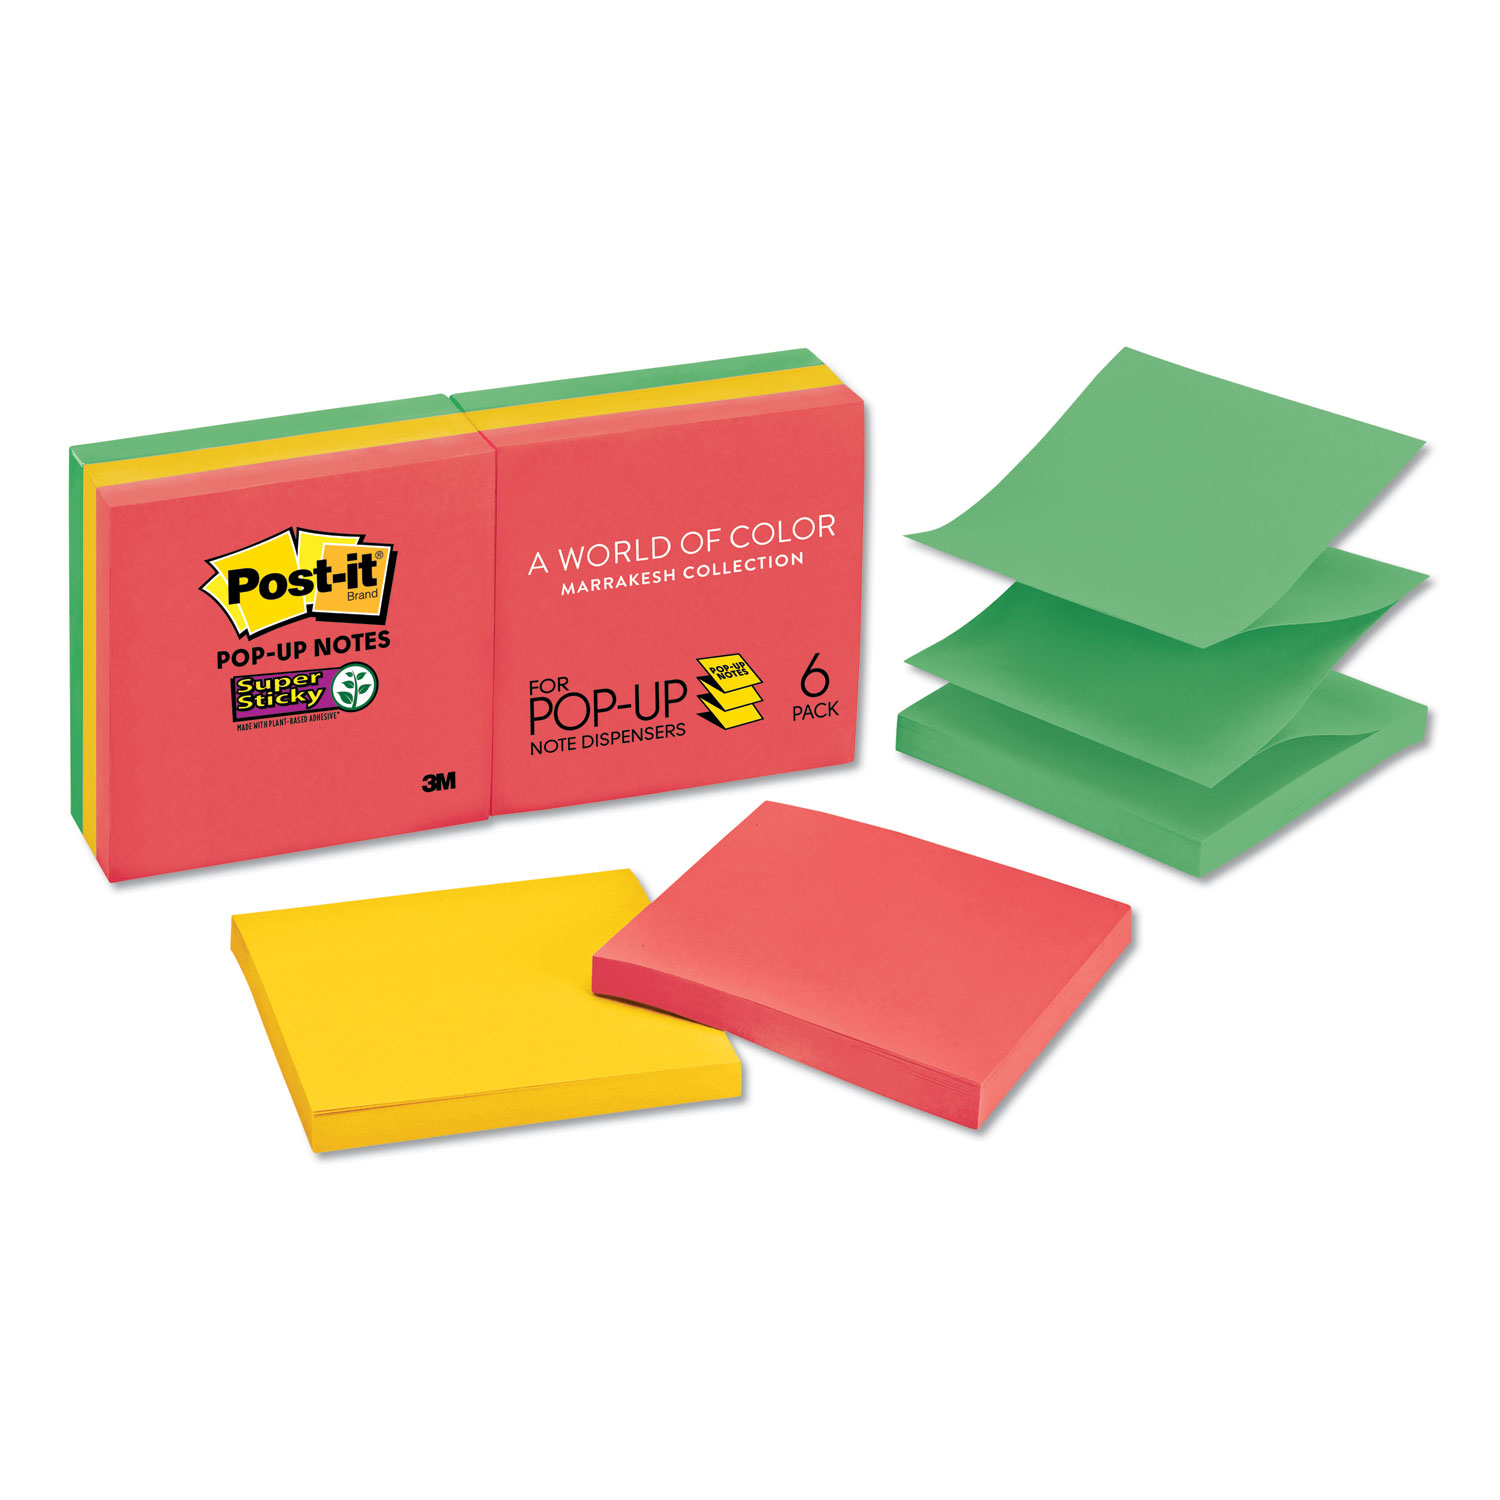 Pop-up 3 x 3 Note Refill, Marrakesh, 90 Notes/Pad, 6 Pads/Pack